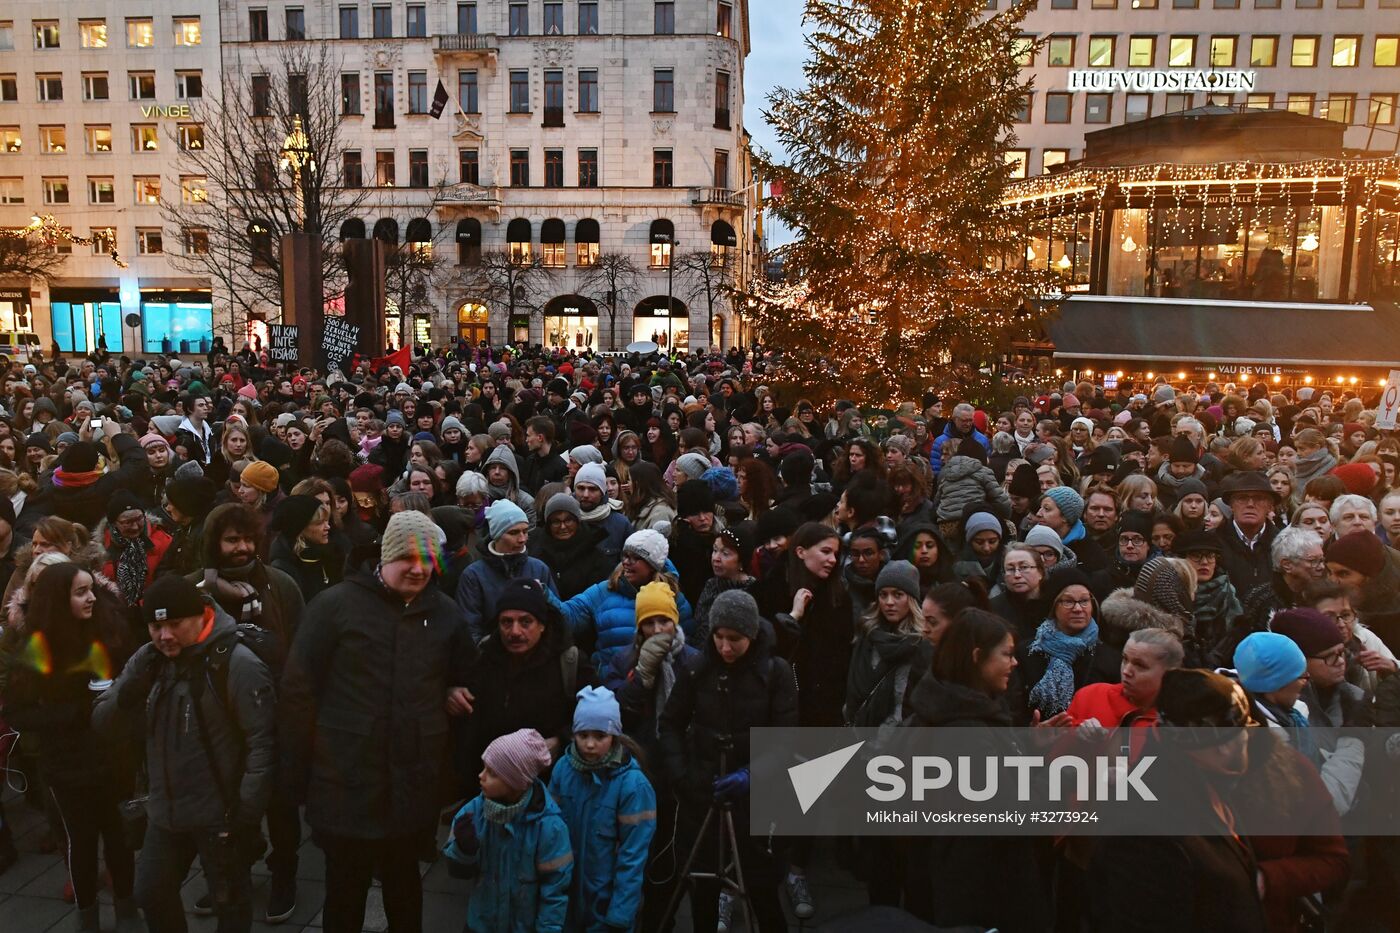 Rally to protest sexual abuse in Stockholm